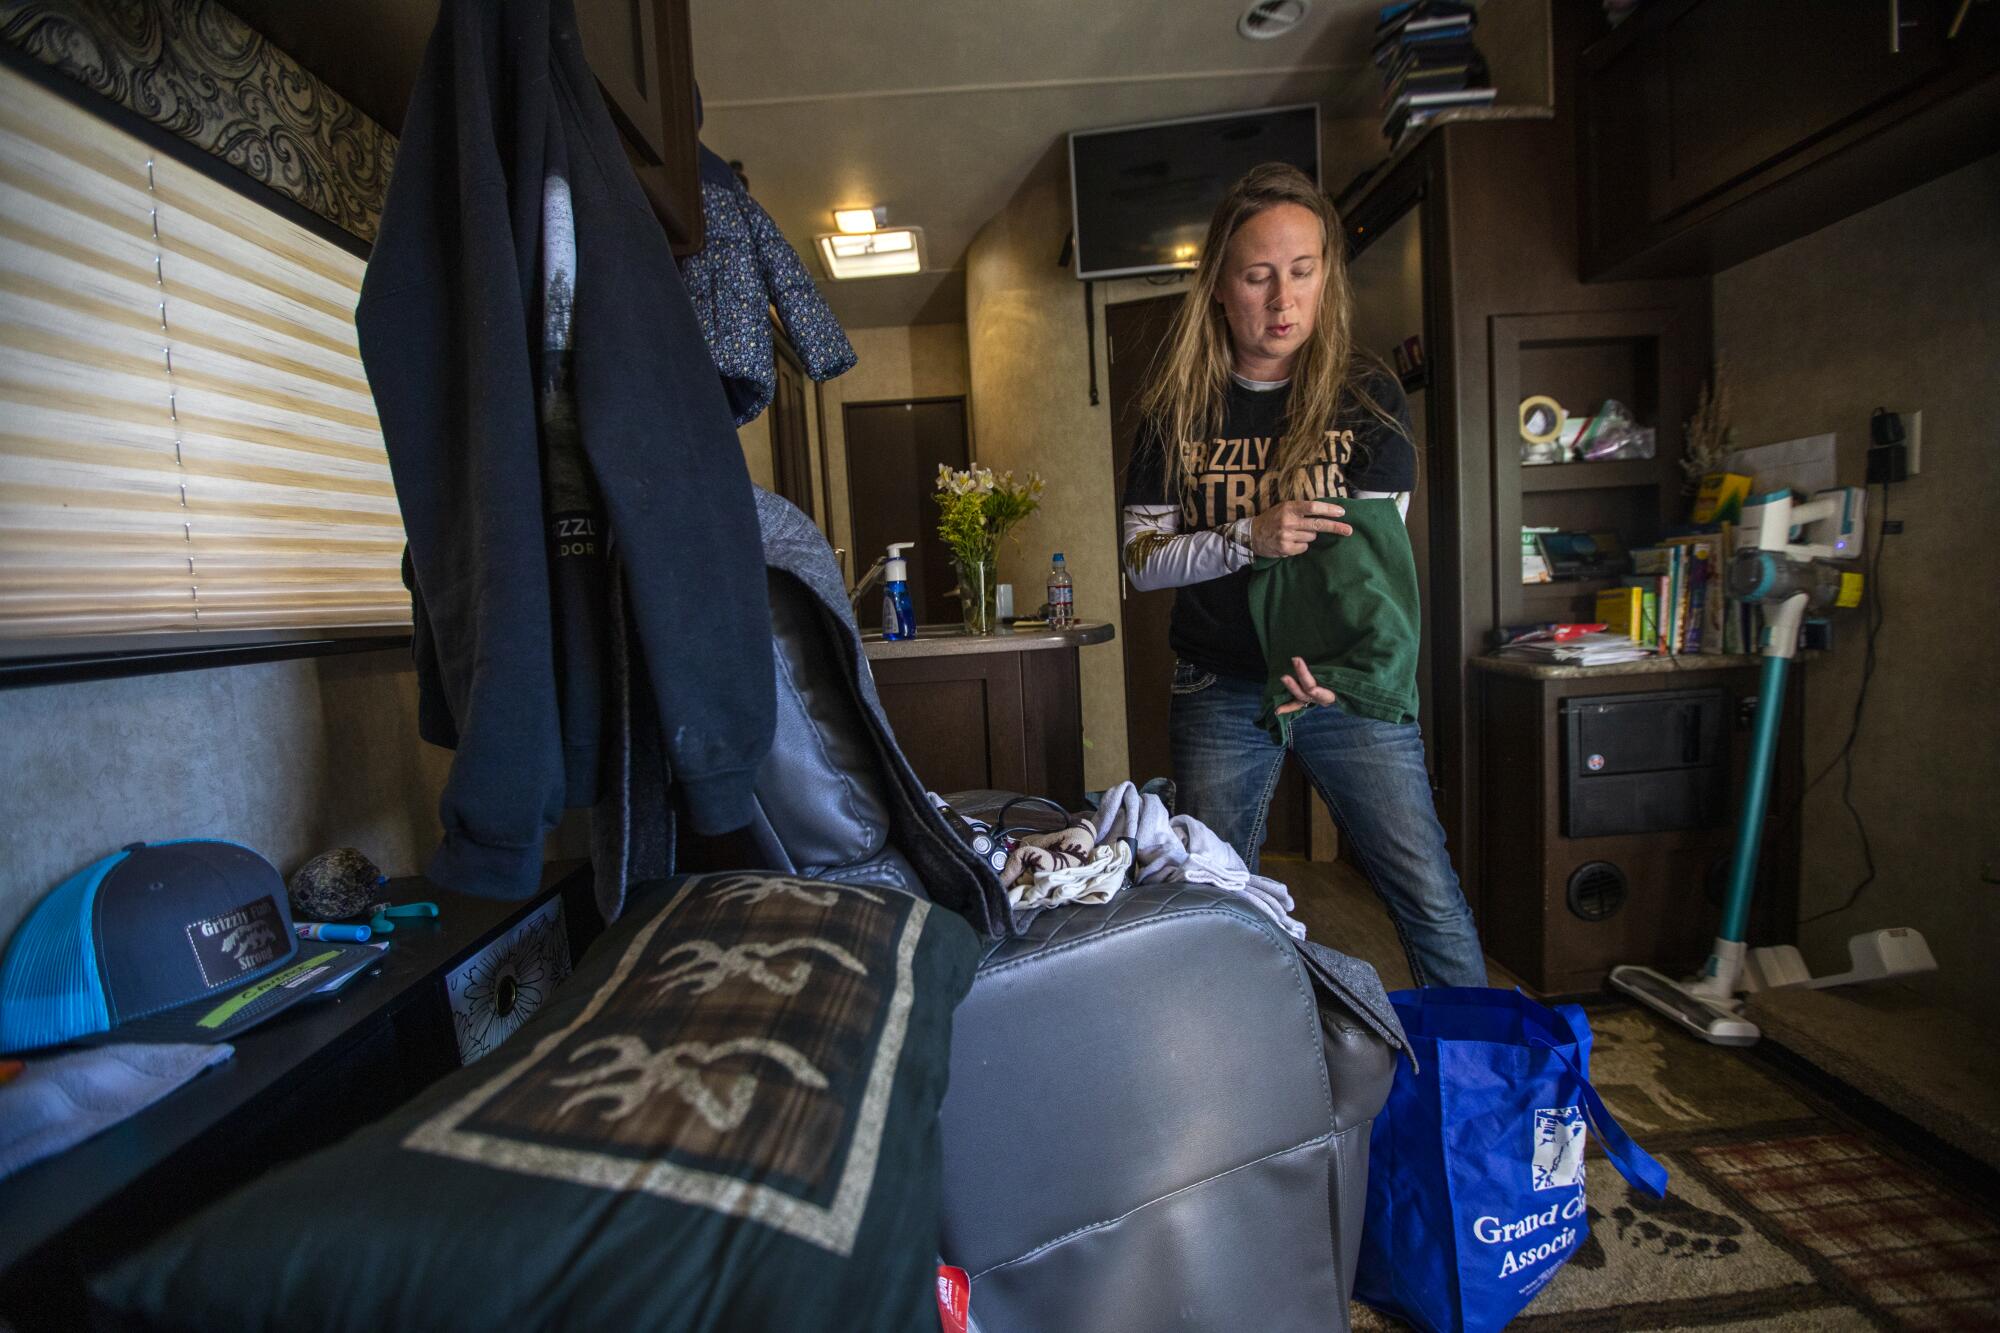 A woman folds laundry in her family's trailer.